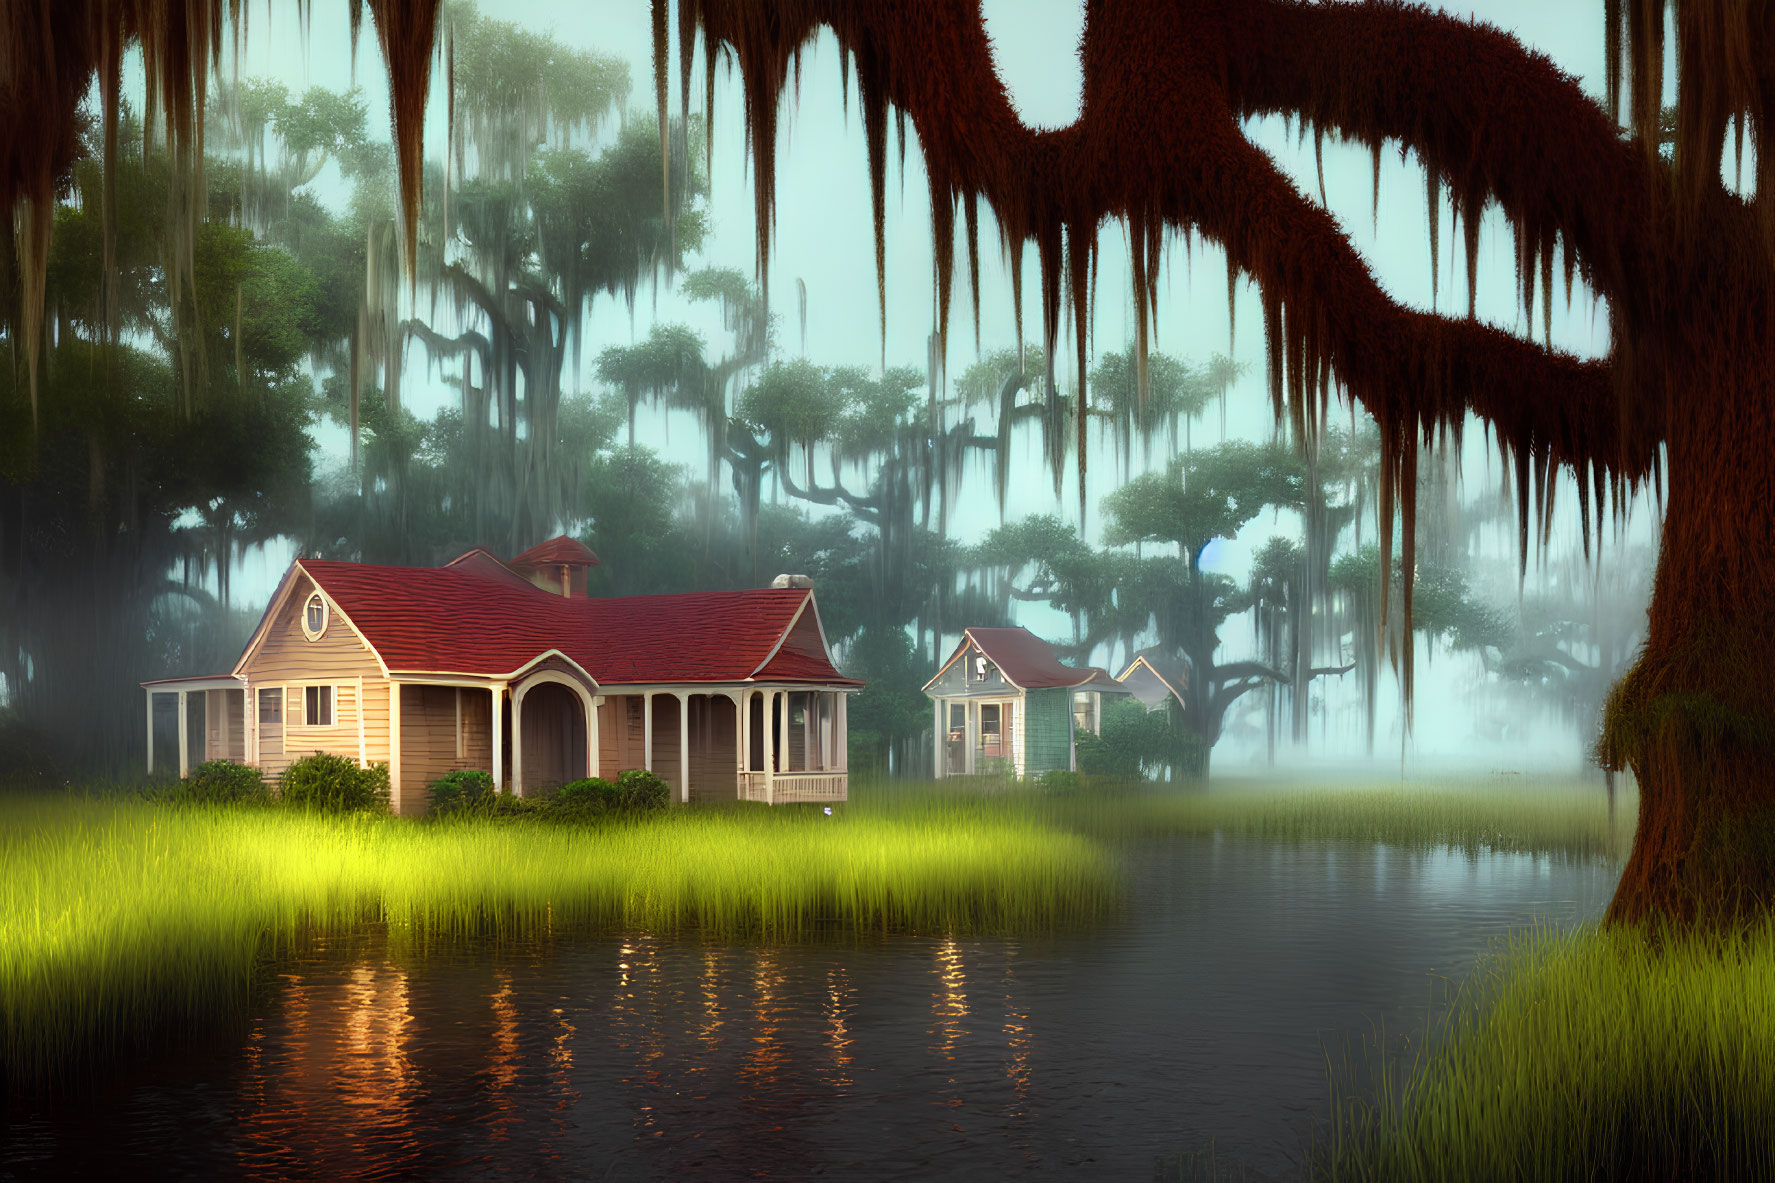 Tranquil lakeside scene with single-story house and moss-draped trees